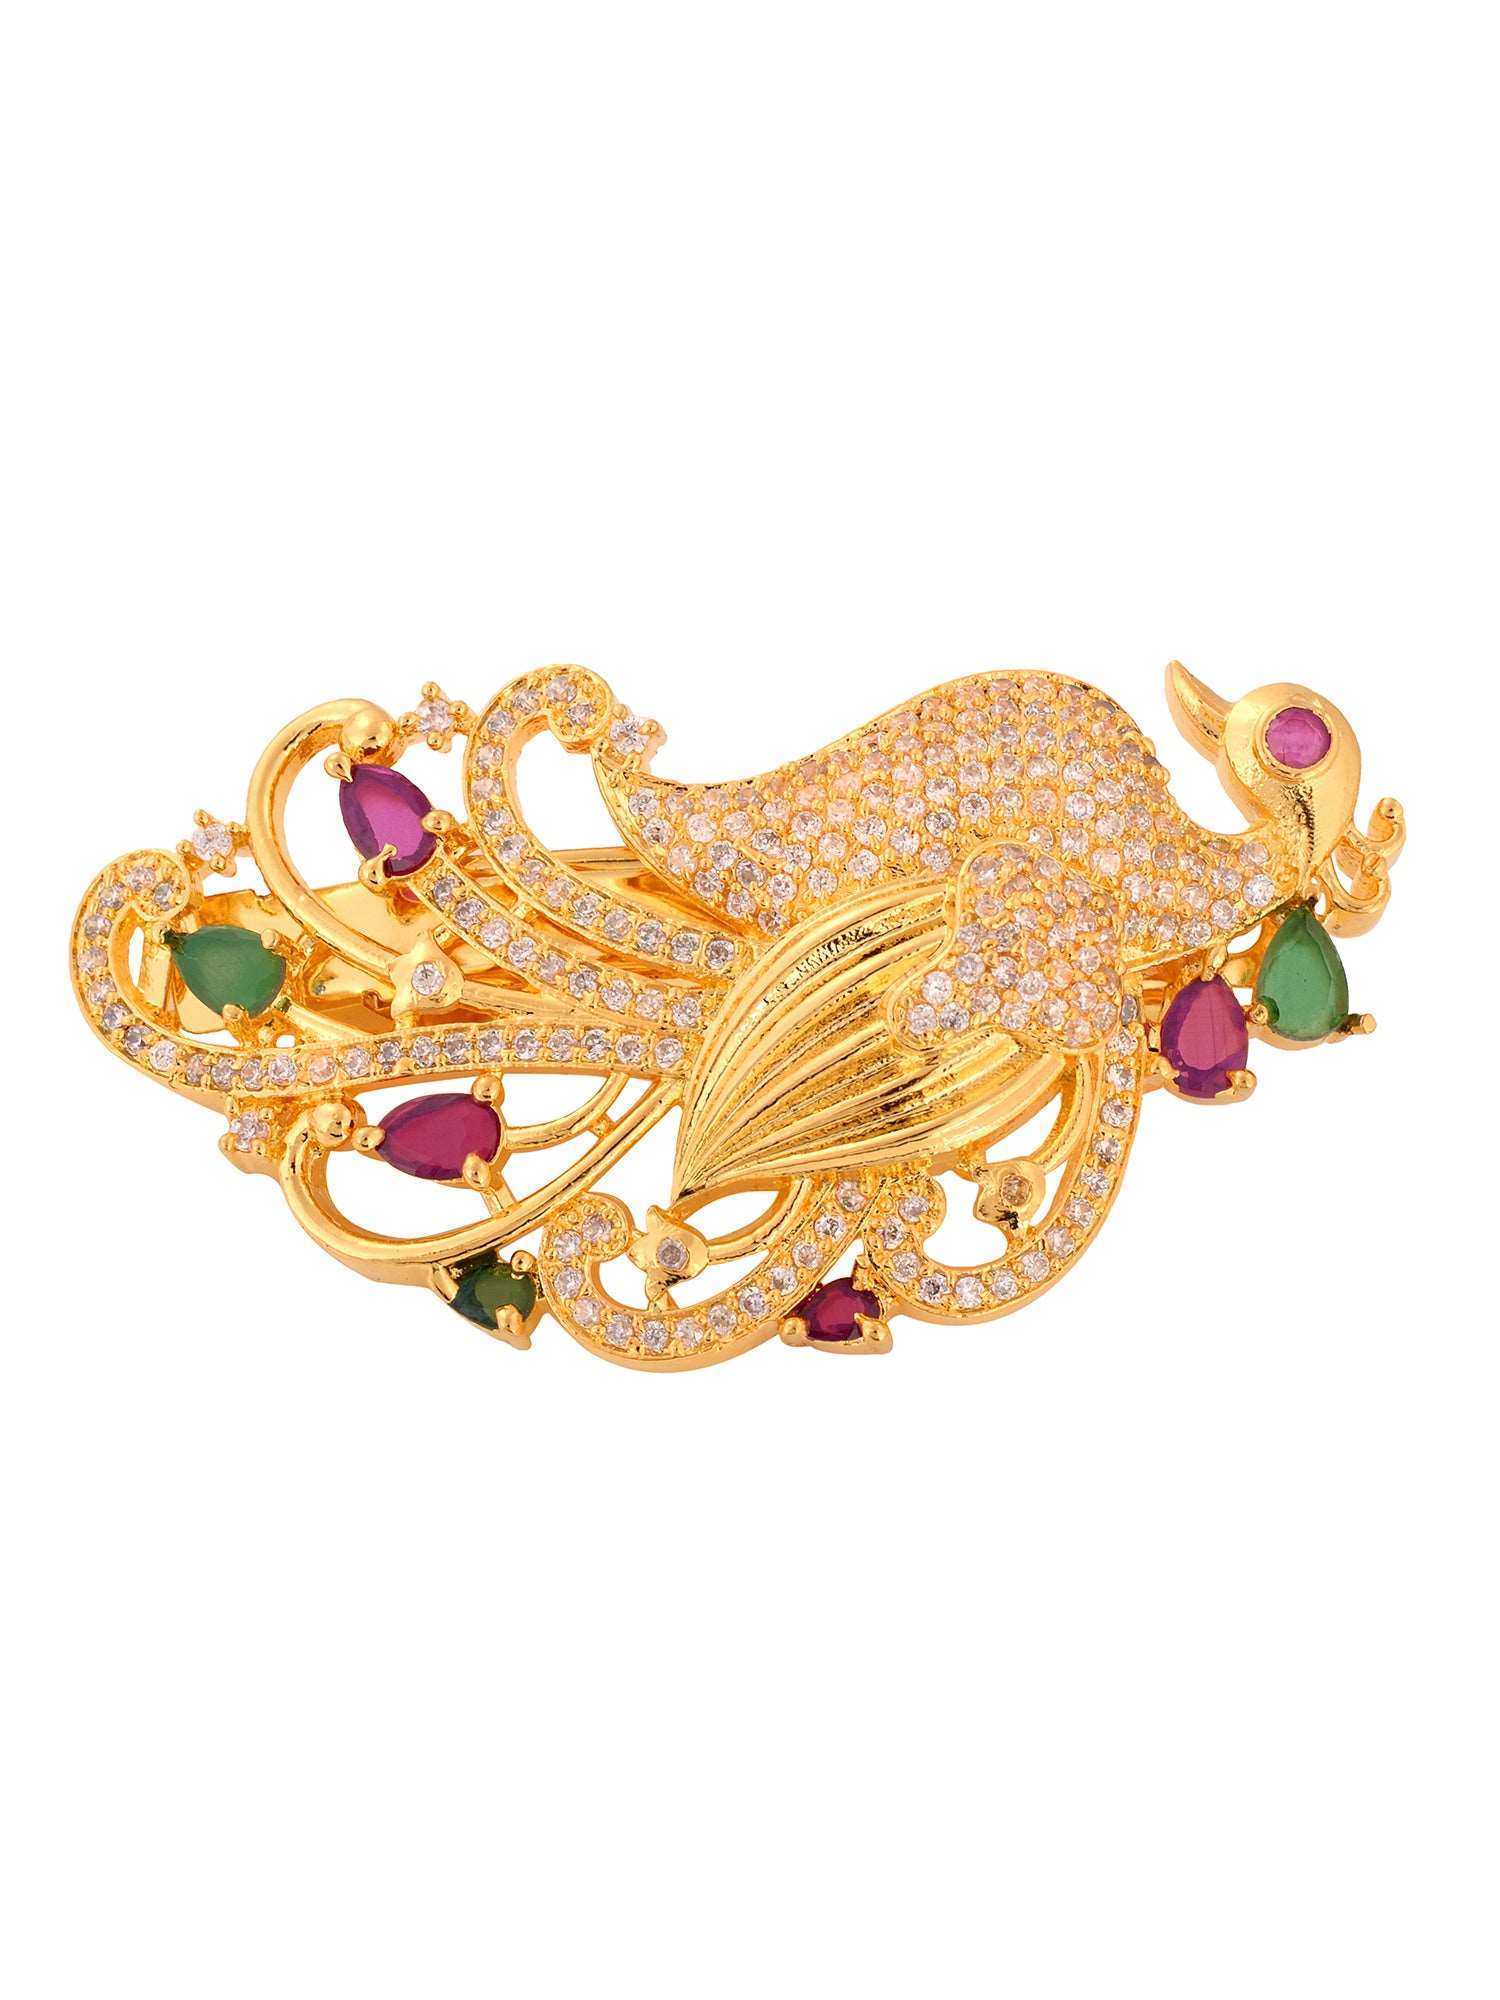 Gold Plated Red & Green Peacock Hair Claw Clip, zaveri pearls, sale price rs, sale price, sale gold plated, sale gold, sale, rubans, ring, regular price, priyassi jewellery, kushal's - Saraf 